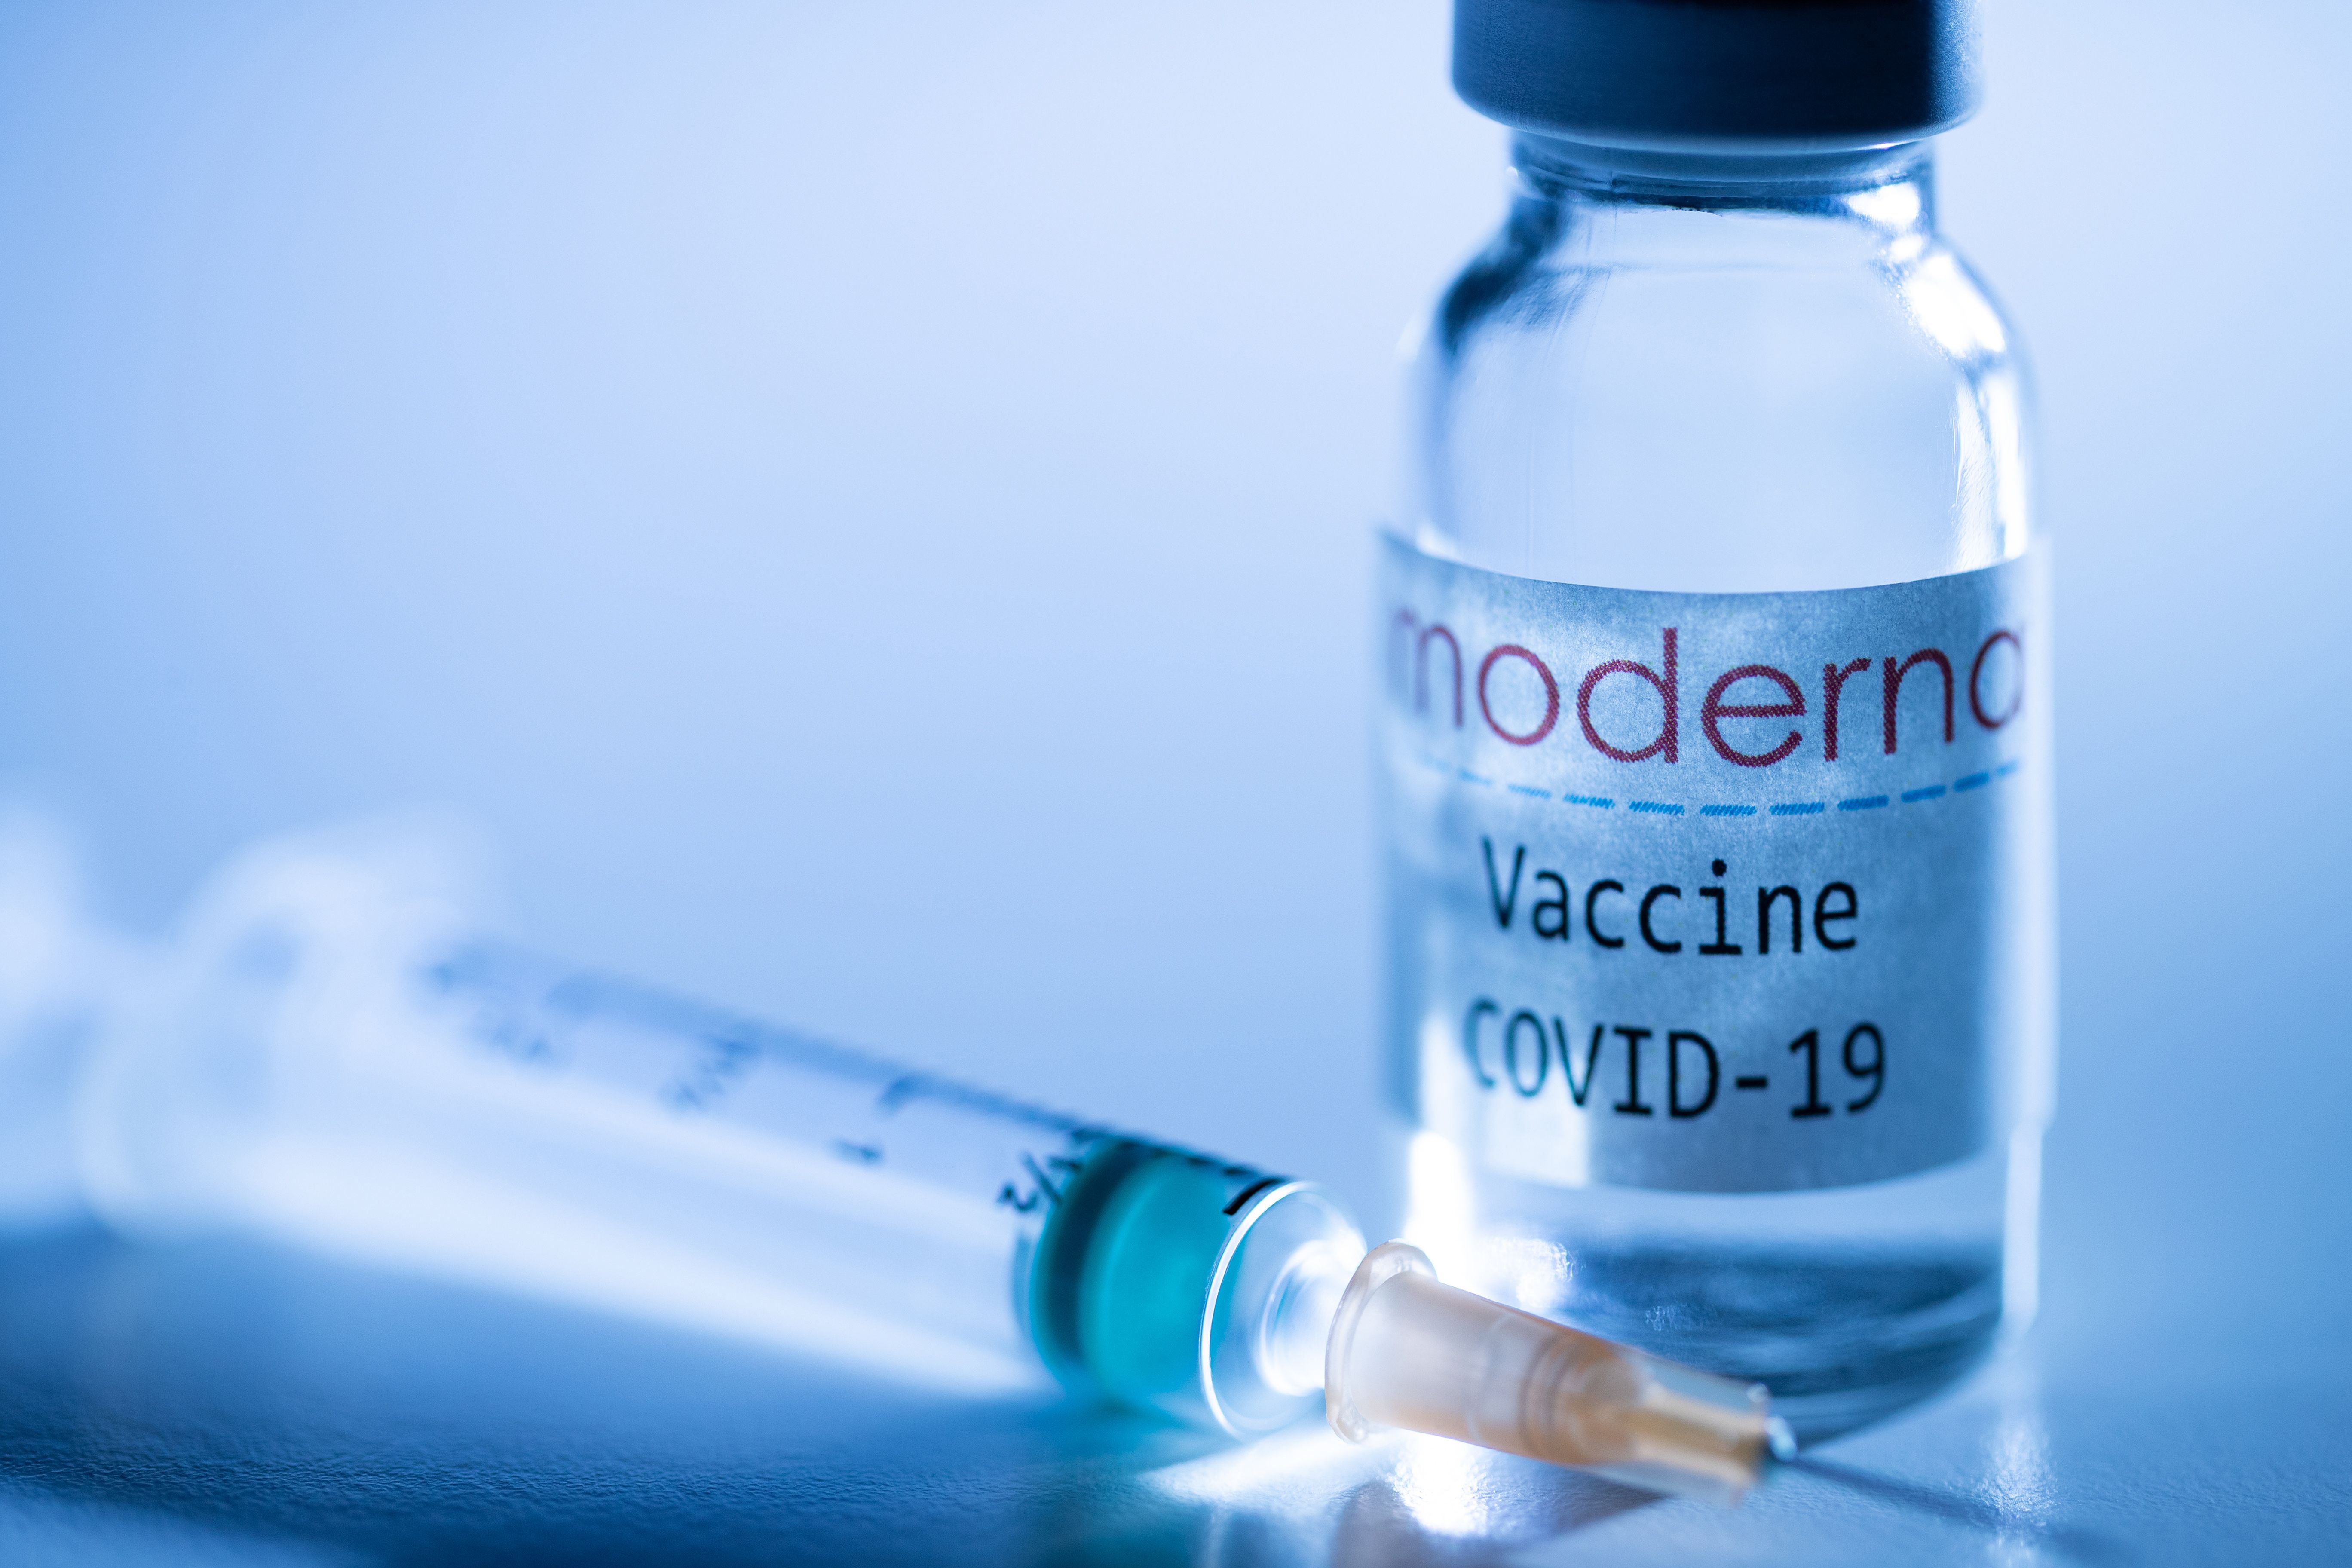 Moderna Pfizer Covid 19 Vaccines Side Effects Are Next Big Challenge Bloomberg